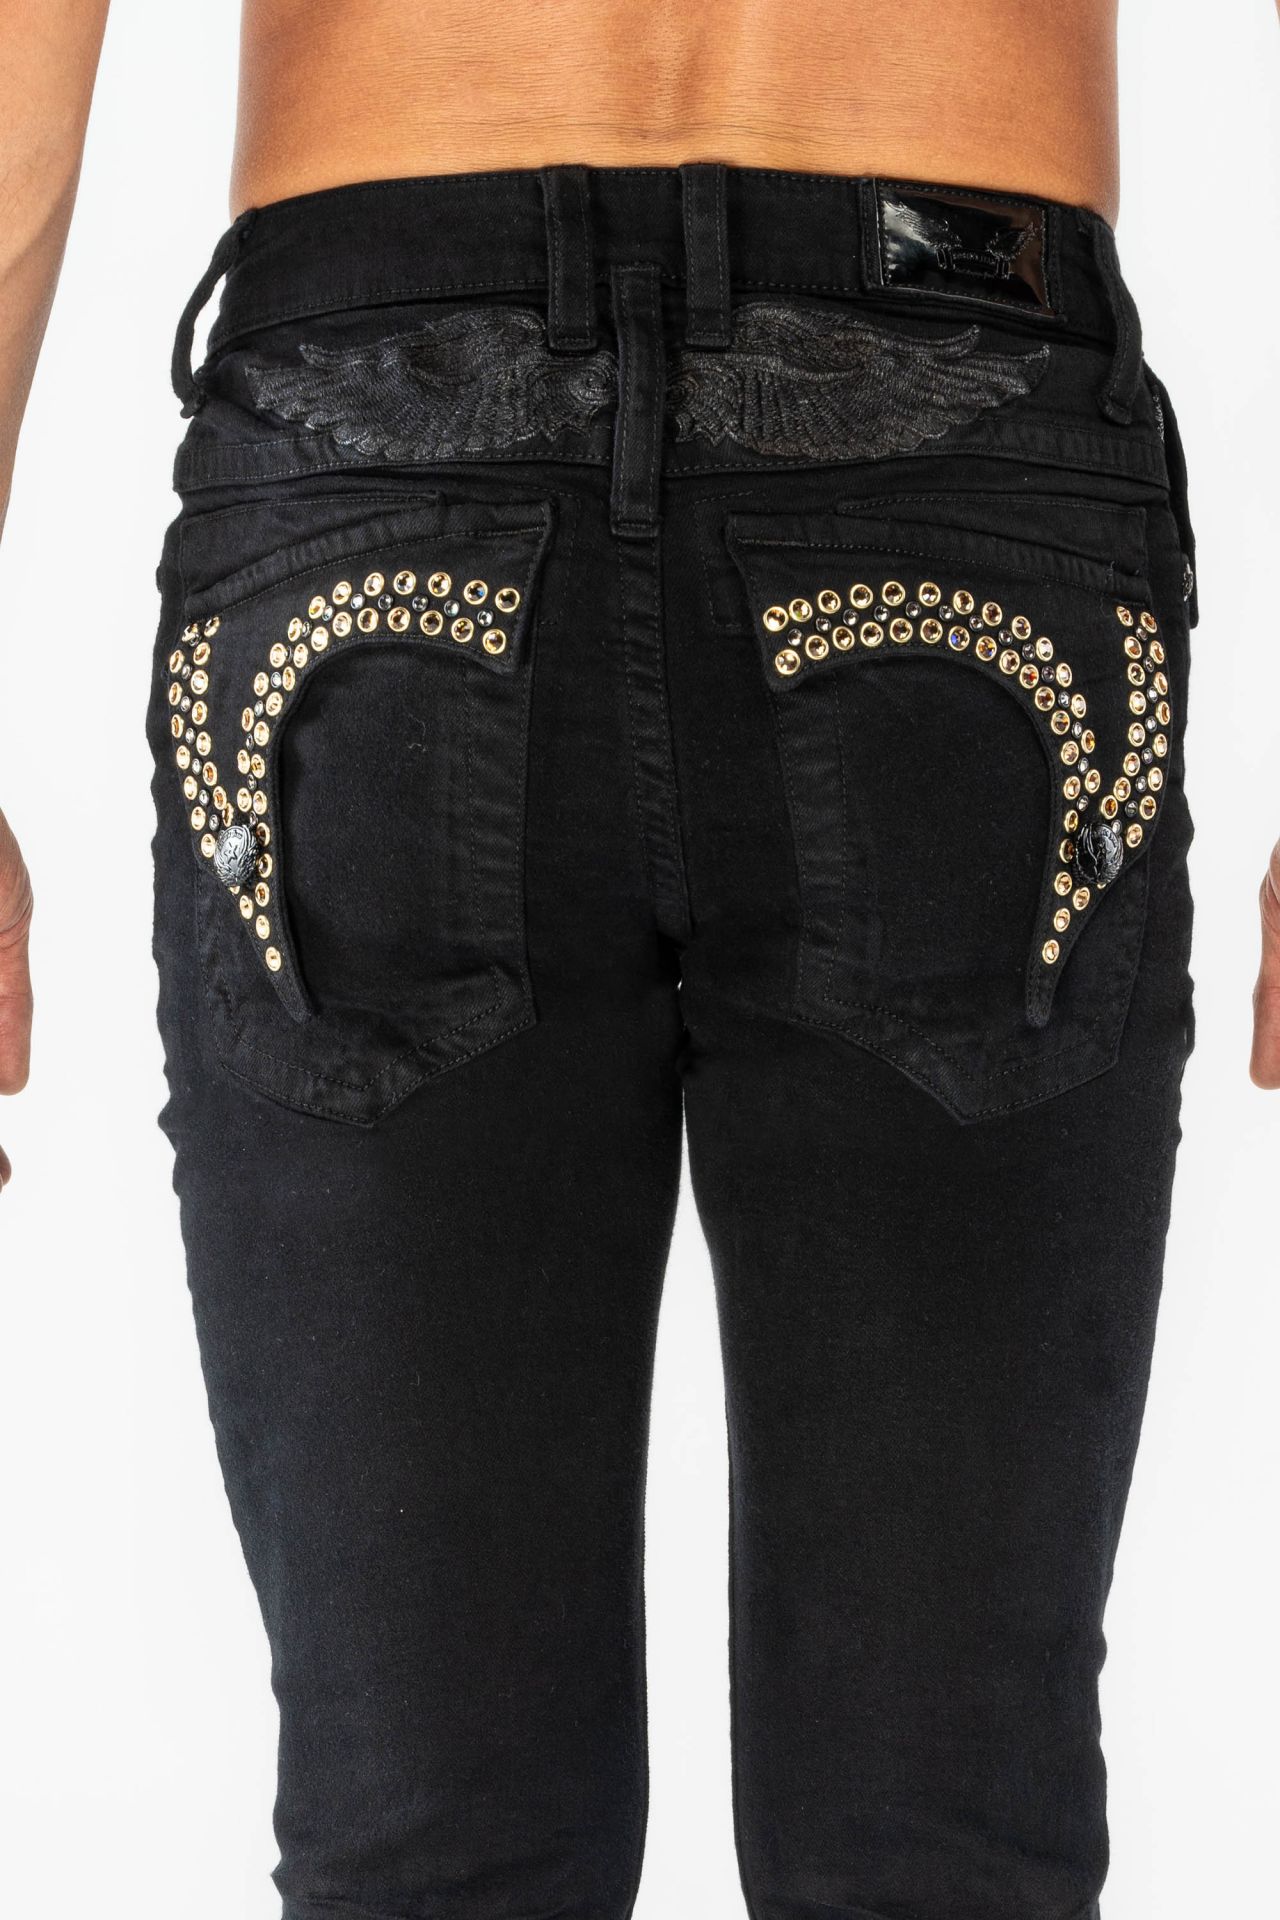 Black Skinny Jeans Crystals with